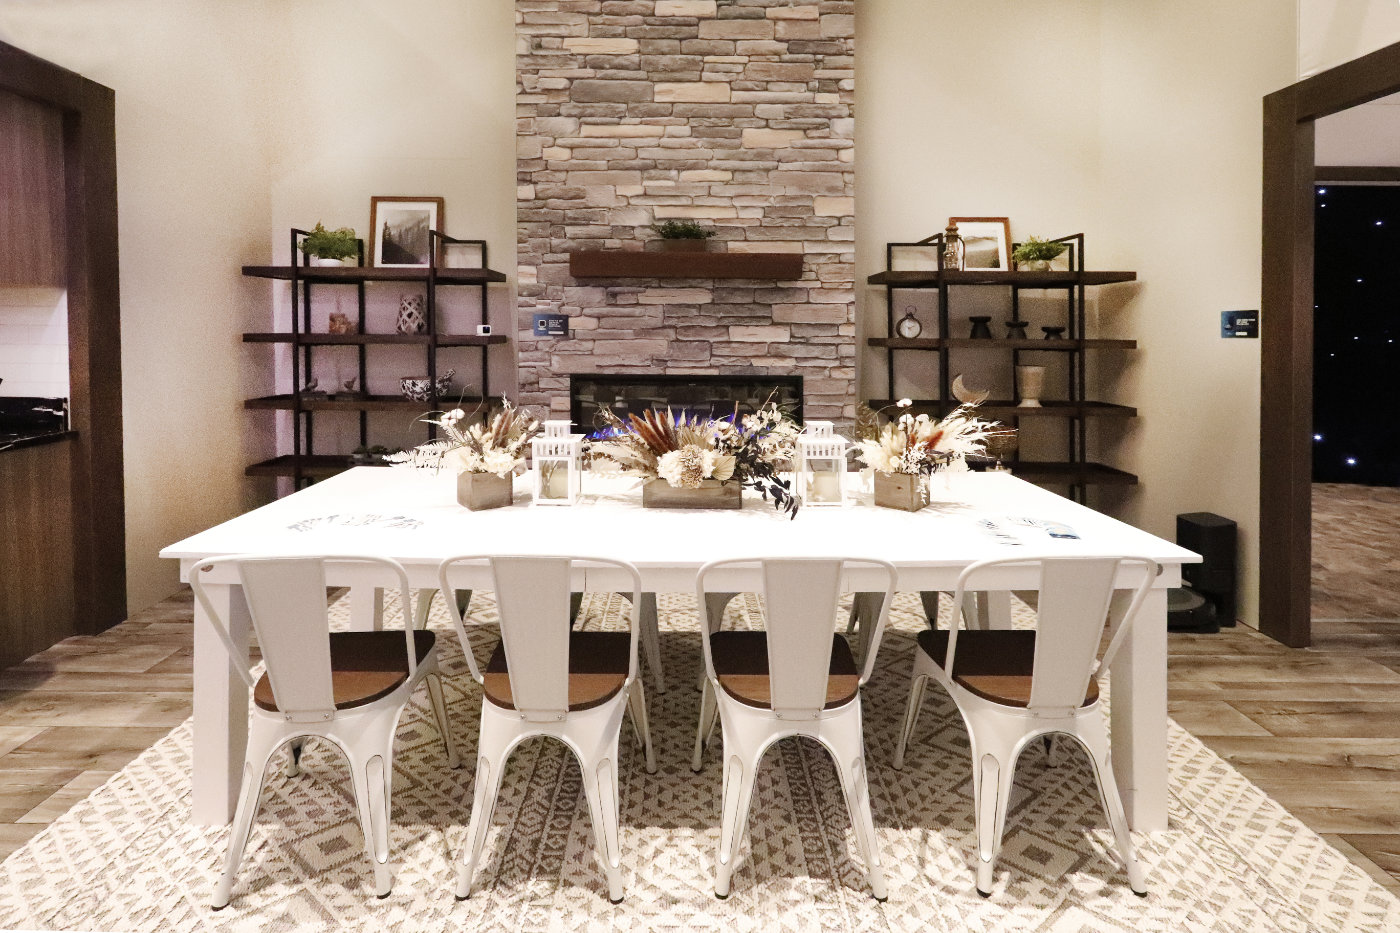 A Dinning room with a white table and chairs, fireplace, and two bookshelves.